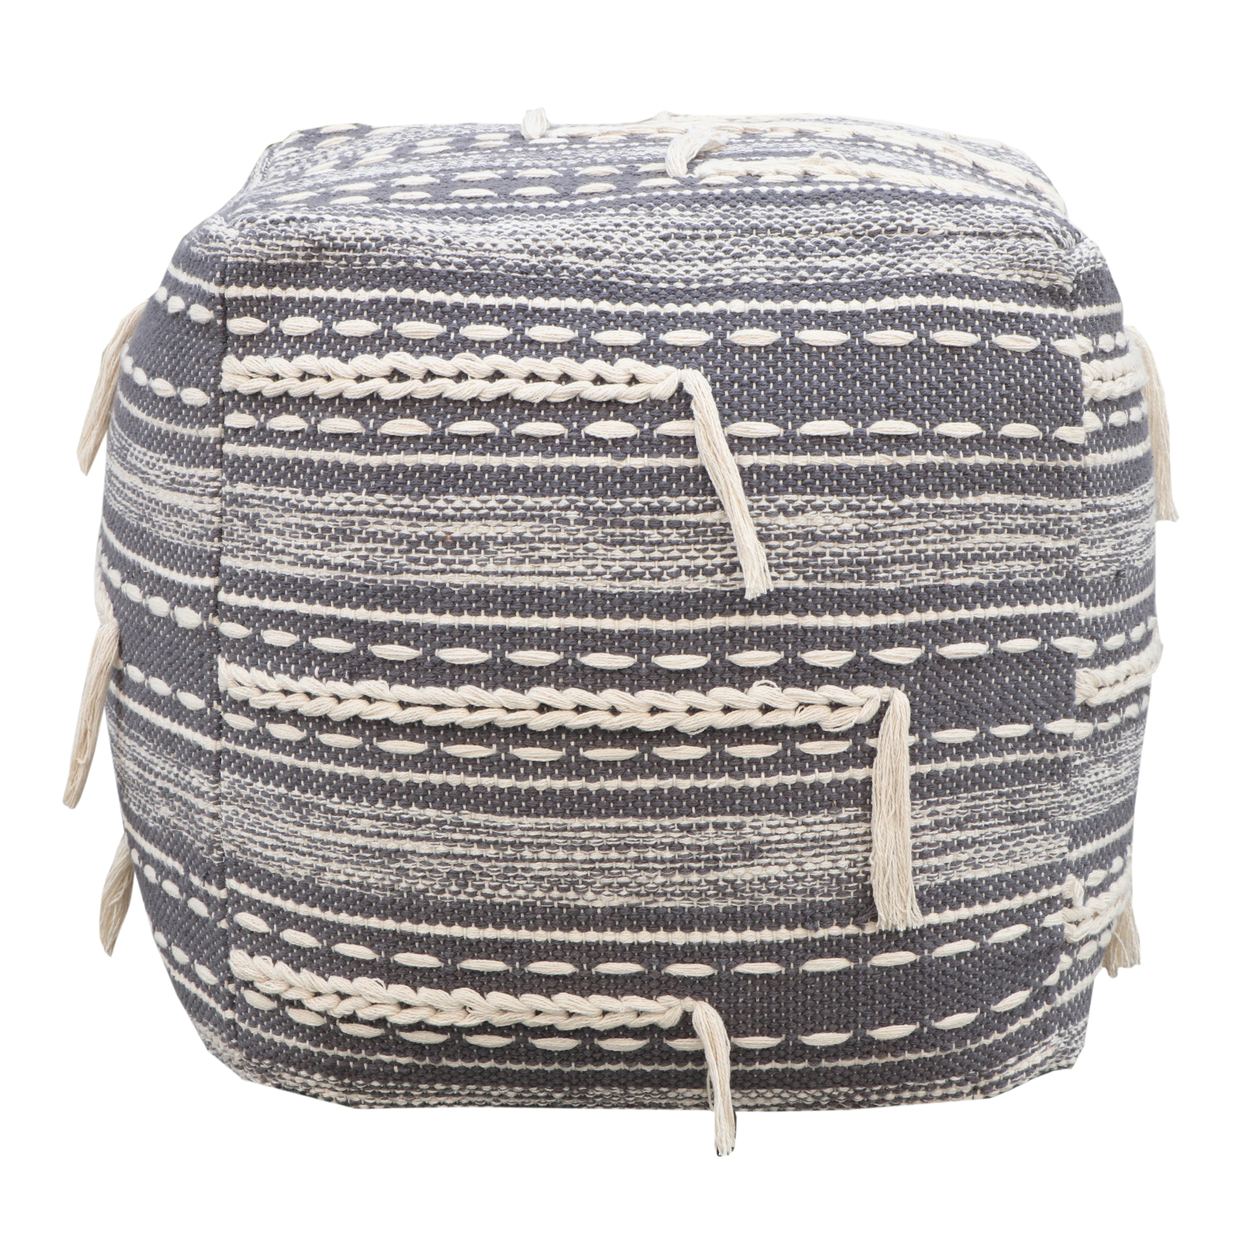 Iconic Home Spearman Ottoman Woven Cotton Upholstered Two-Tone Striped Pattern With Tassels Square Pouf - Black